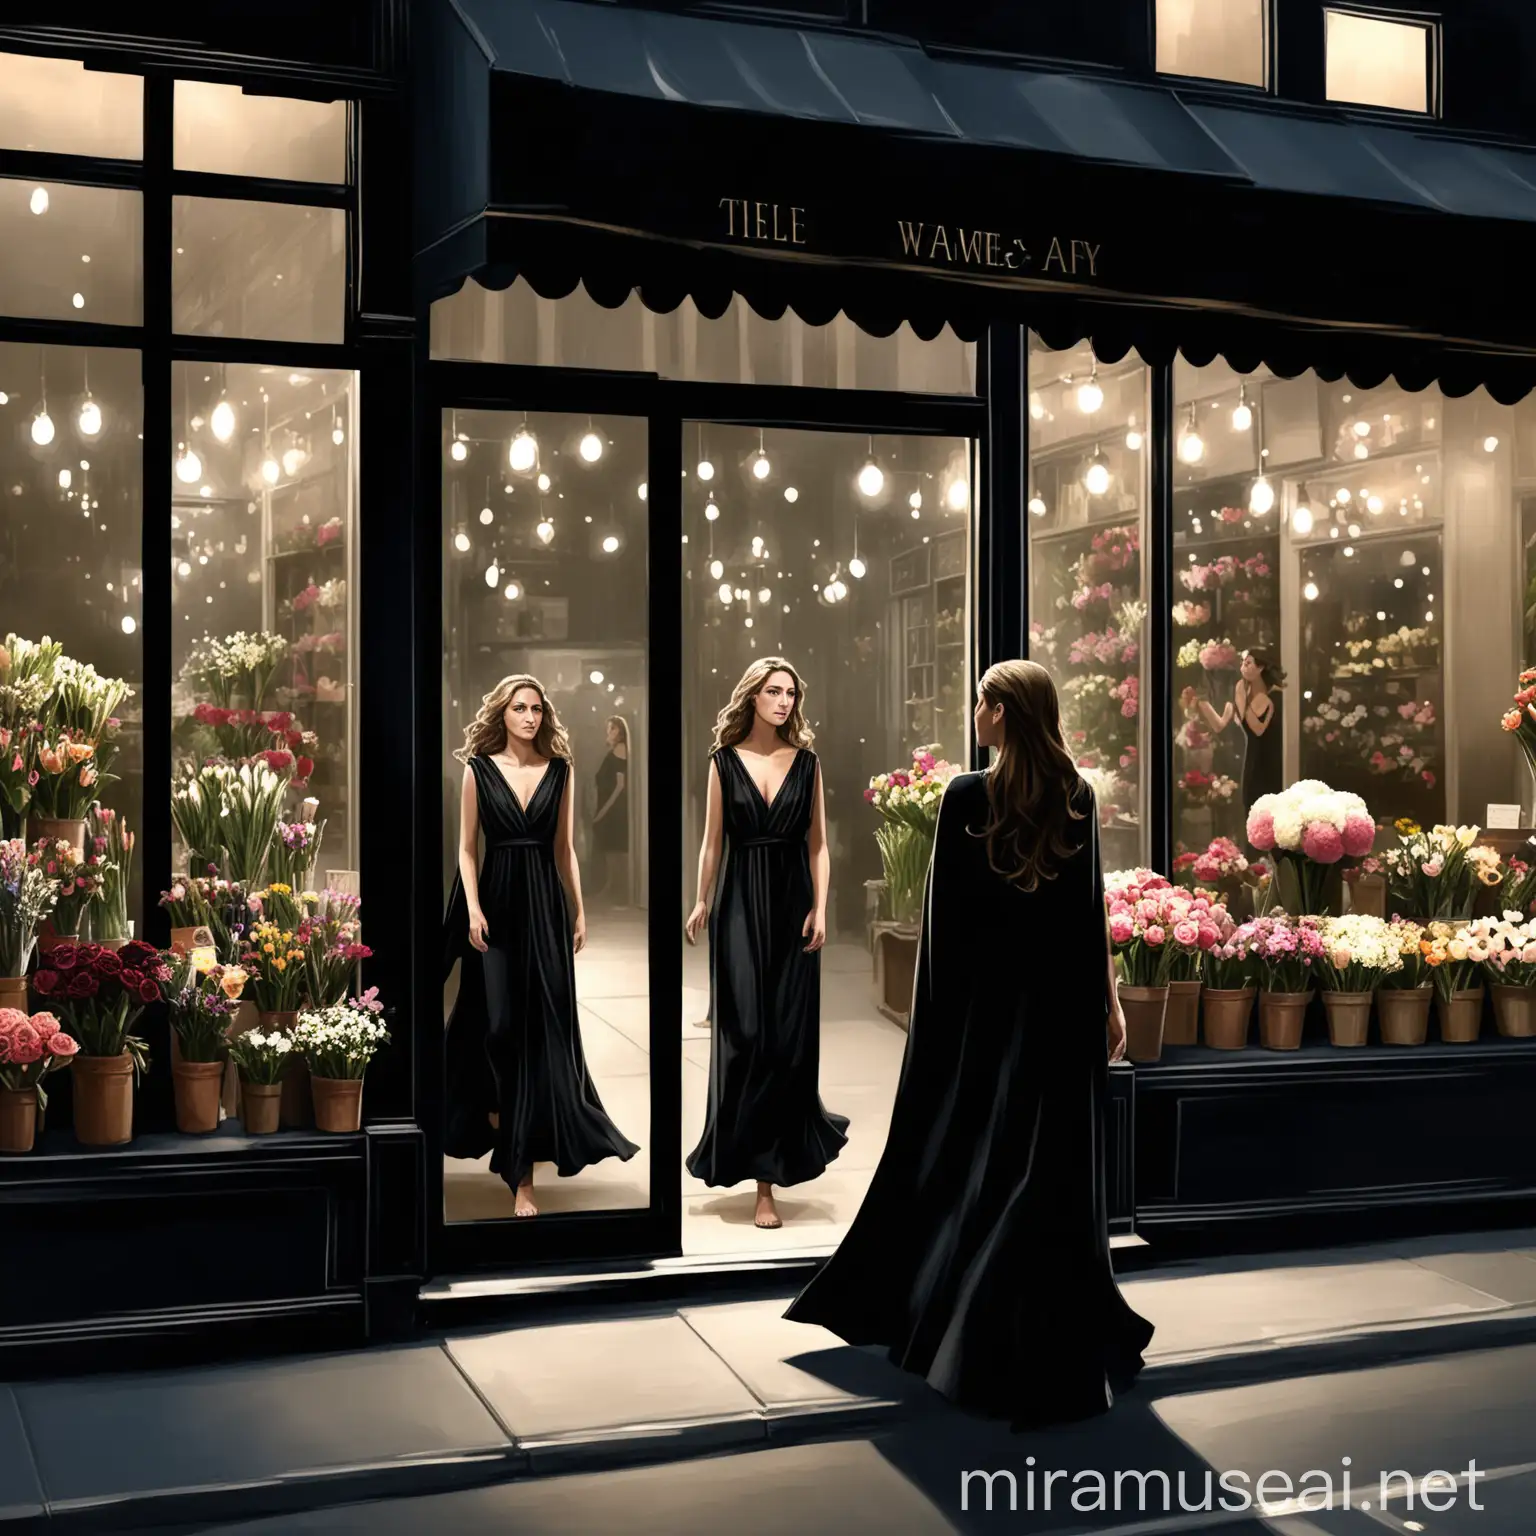 A new york sidewalk at nighttime. it is dark.
there is a flowershop.
the only light comes from a single streetlight. 
a woman running towards me.
the woman is wearing a full length gloss black dress. 
the dress is in the style of a Grecian tunic.
The woman is wearing black cape. 
the woman is looking at her reflection in the flowershop window. the woman has an admiring expression on her face.